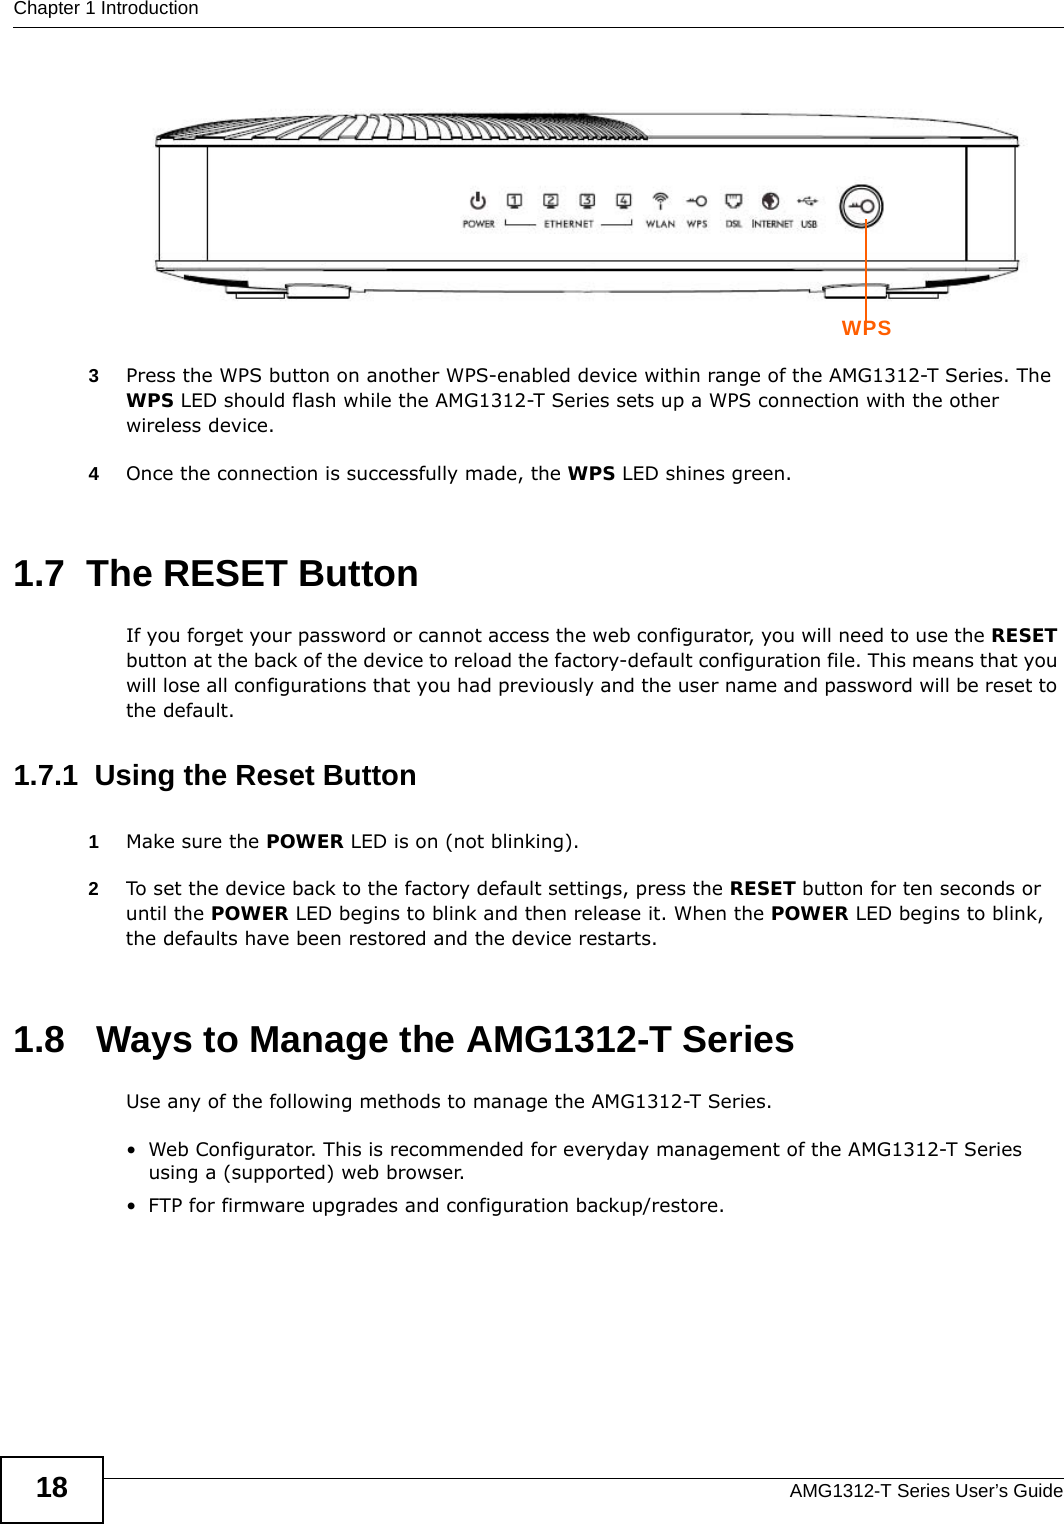 Chapter 1 IntroductionAMG1312-T Series User’s Guide18 3Press the WPS button on another WPS-enabled device within range of the AMG1312-T Series. The WPS LED should flash while the AMG1312-T Series sets up a WPS connection with the other wireless device. 4Once the connection is successfully made, the WPS LED shines green.1.7  The RESET ButtonIf you forget your password or cannot access the web configurator, you will need to use the RESET button at the back of the device to reload the factory-default configuration file. This means that you will lose all configurations that you had previously and the user name and password will be reset to the default.1.7.1  Using the Reset Button1Make sure the POWER LED is on (not blinking).2To set the device back to the factory default settings, press the RESET button for ten seconds or until the POWER LED begins to blink and then release it. When the POWER LED begins to blink, the defaults have been restored and the device restarts.1.8   Ways to Manage the AMG1312-T SeriesUse any of the following methods to manage the AMG1312-T Series.• Web Configurator. This is recommended for everyday management of the AMG1312-T Series using a (supported) web browser.• FTP for firmware upgrades and configuration backup/restore.WPS